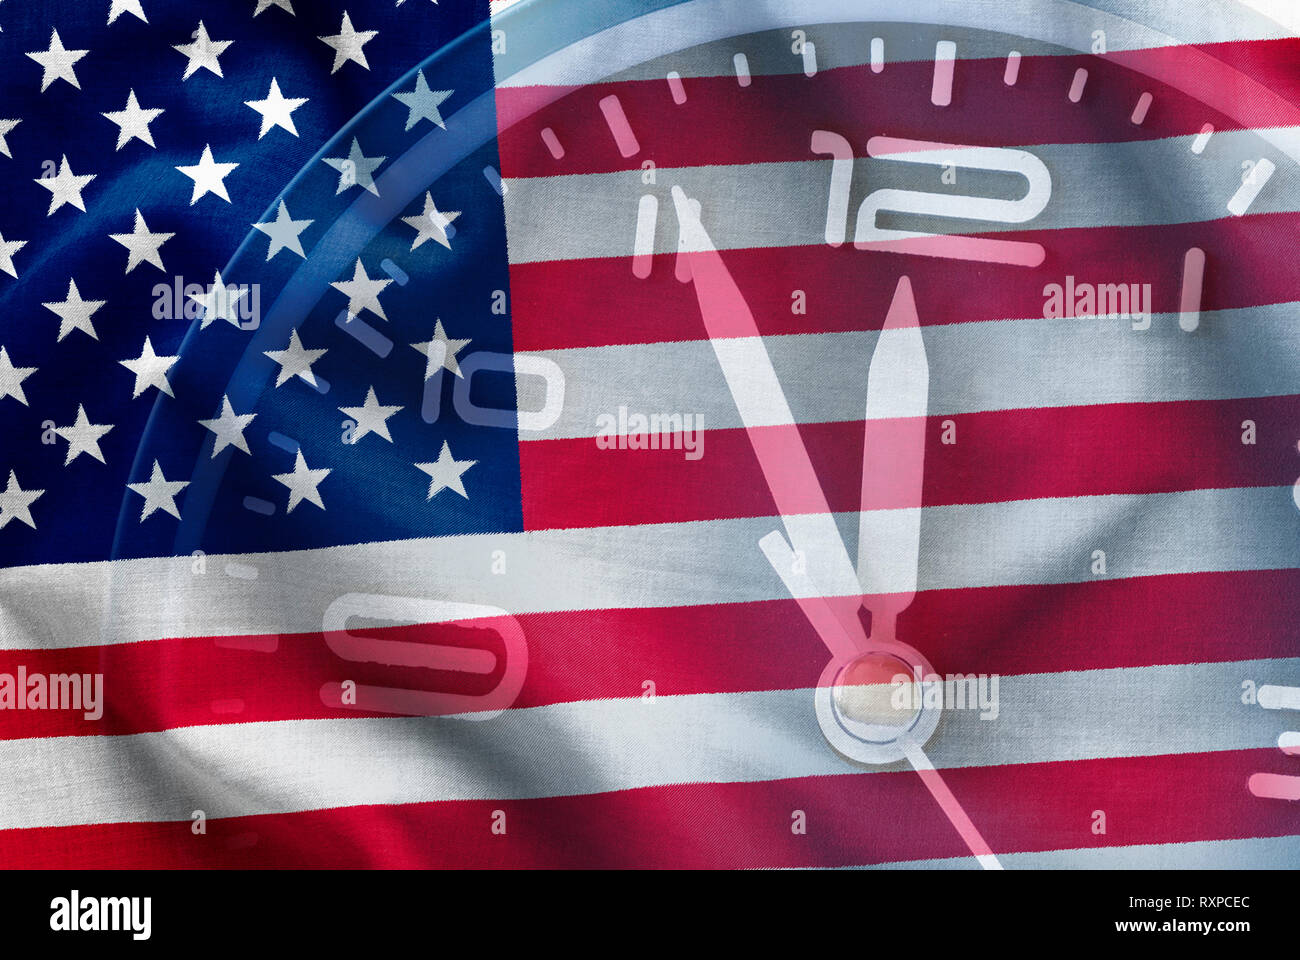 Composite of the American flag, Stars and Stripes, Old Glory, with a clock dial showing the time as five to twelve in a conceptual image Stock Photo